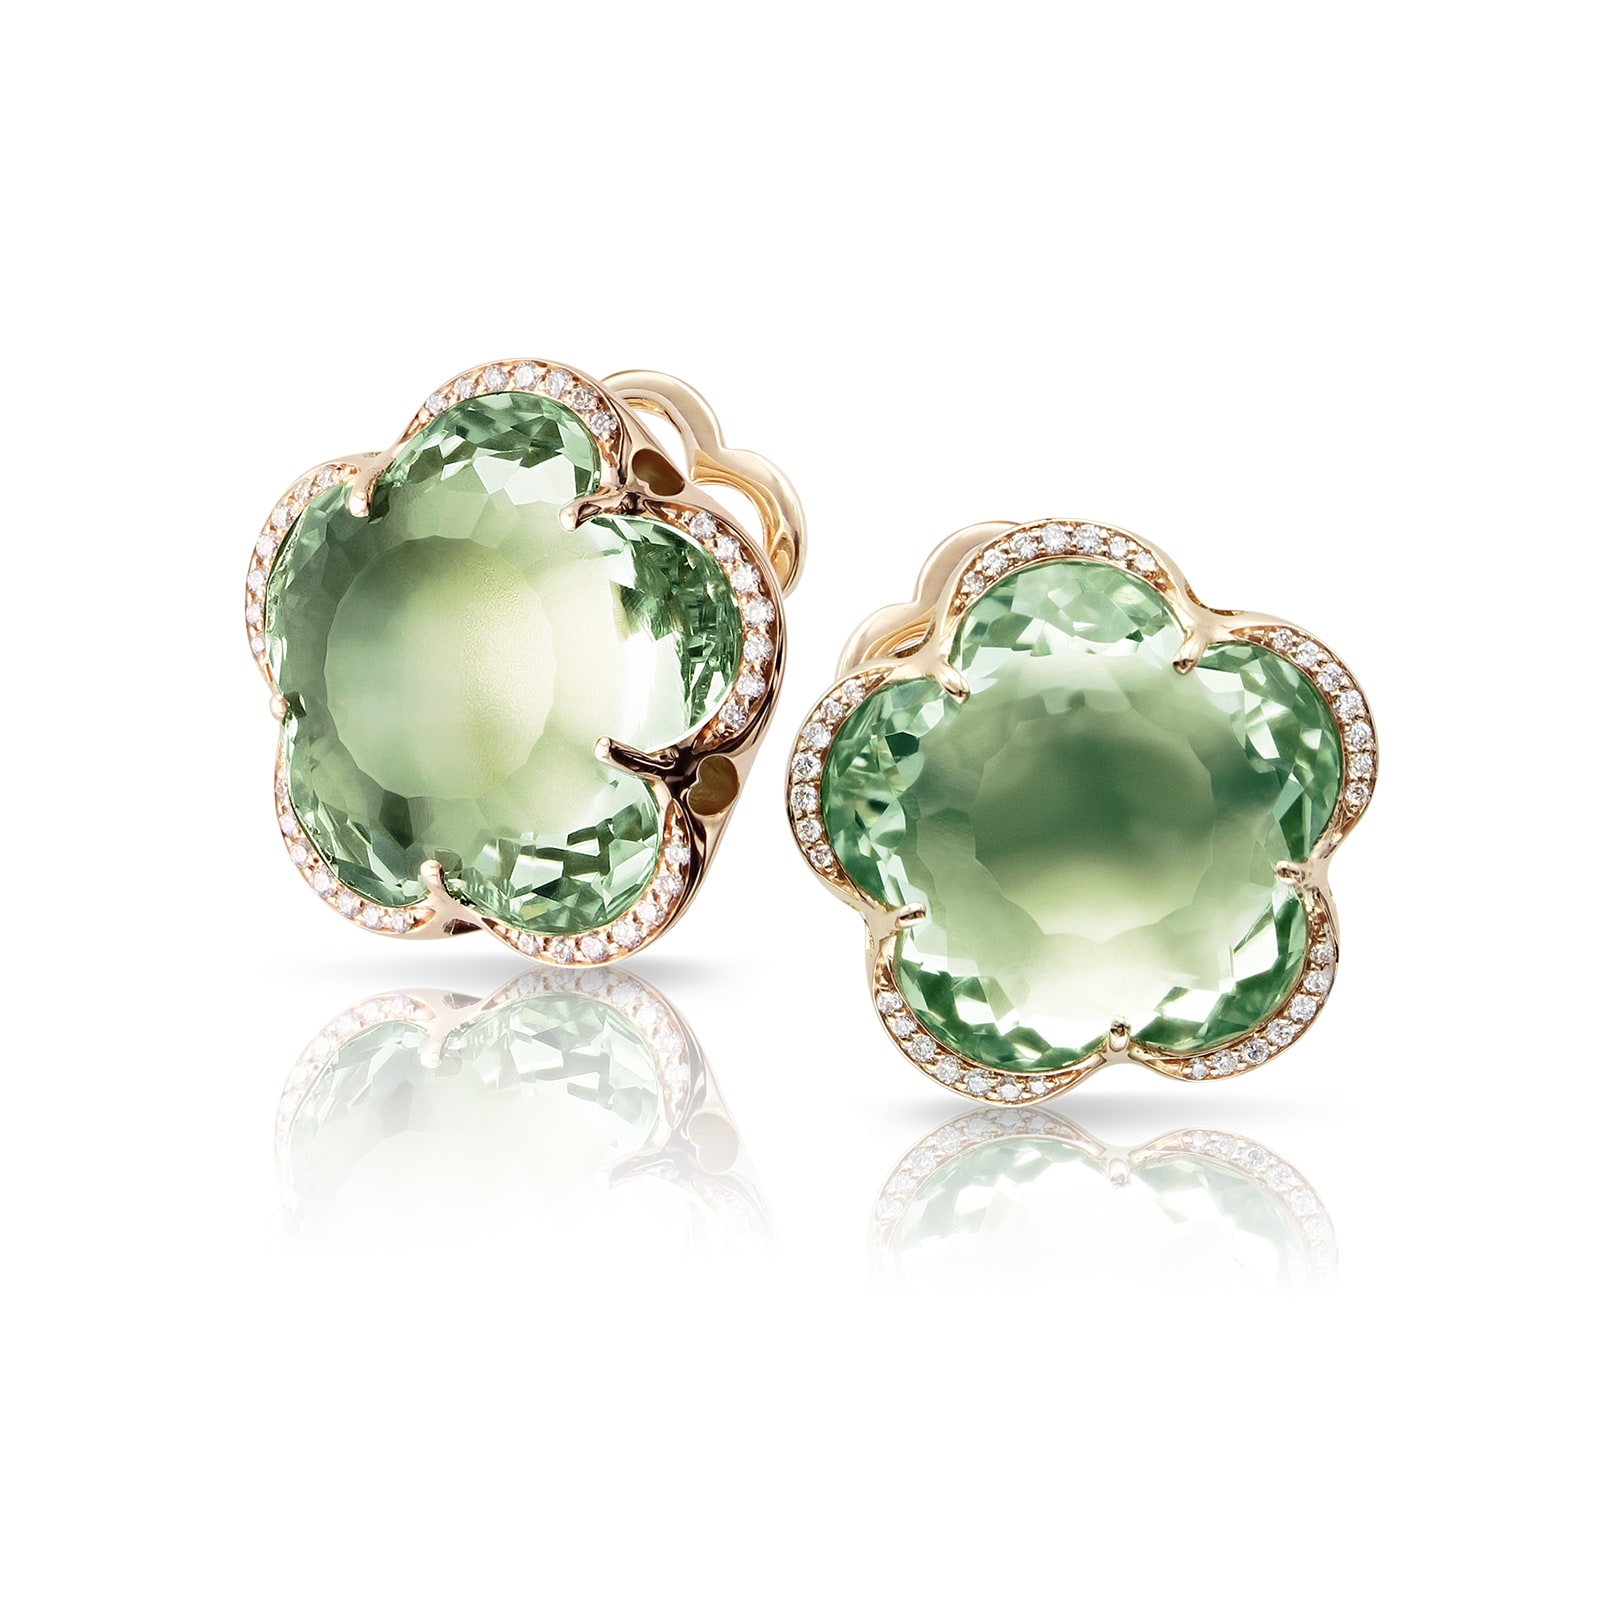 Bon Ton Dolce Vita Stud Earrings in 18ct Rose Gold with Prasiolite and Diamonds